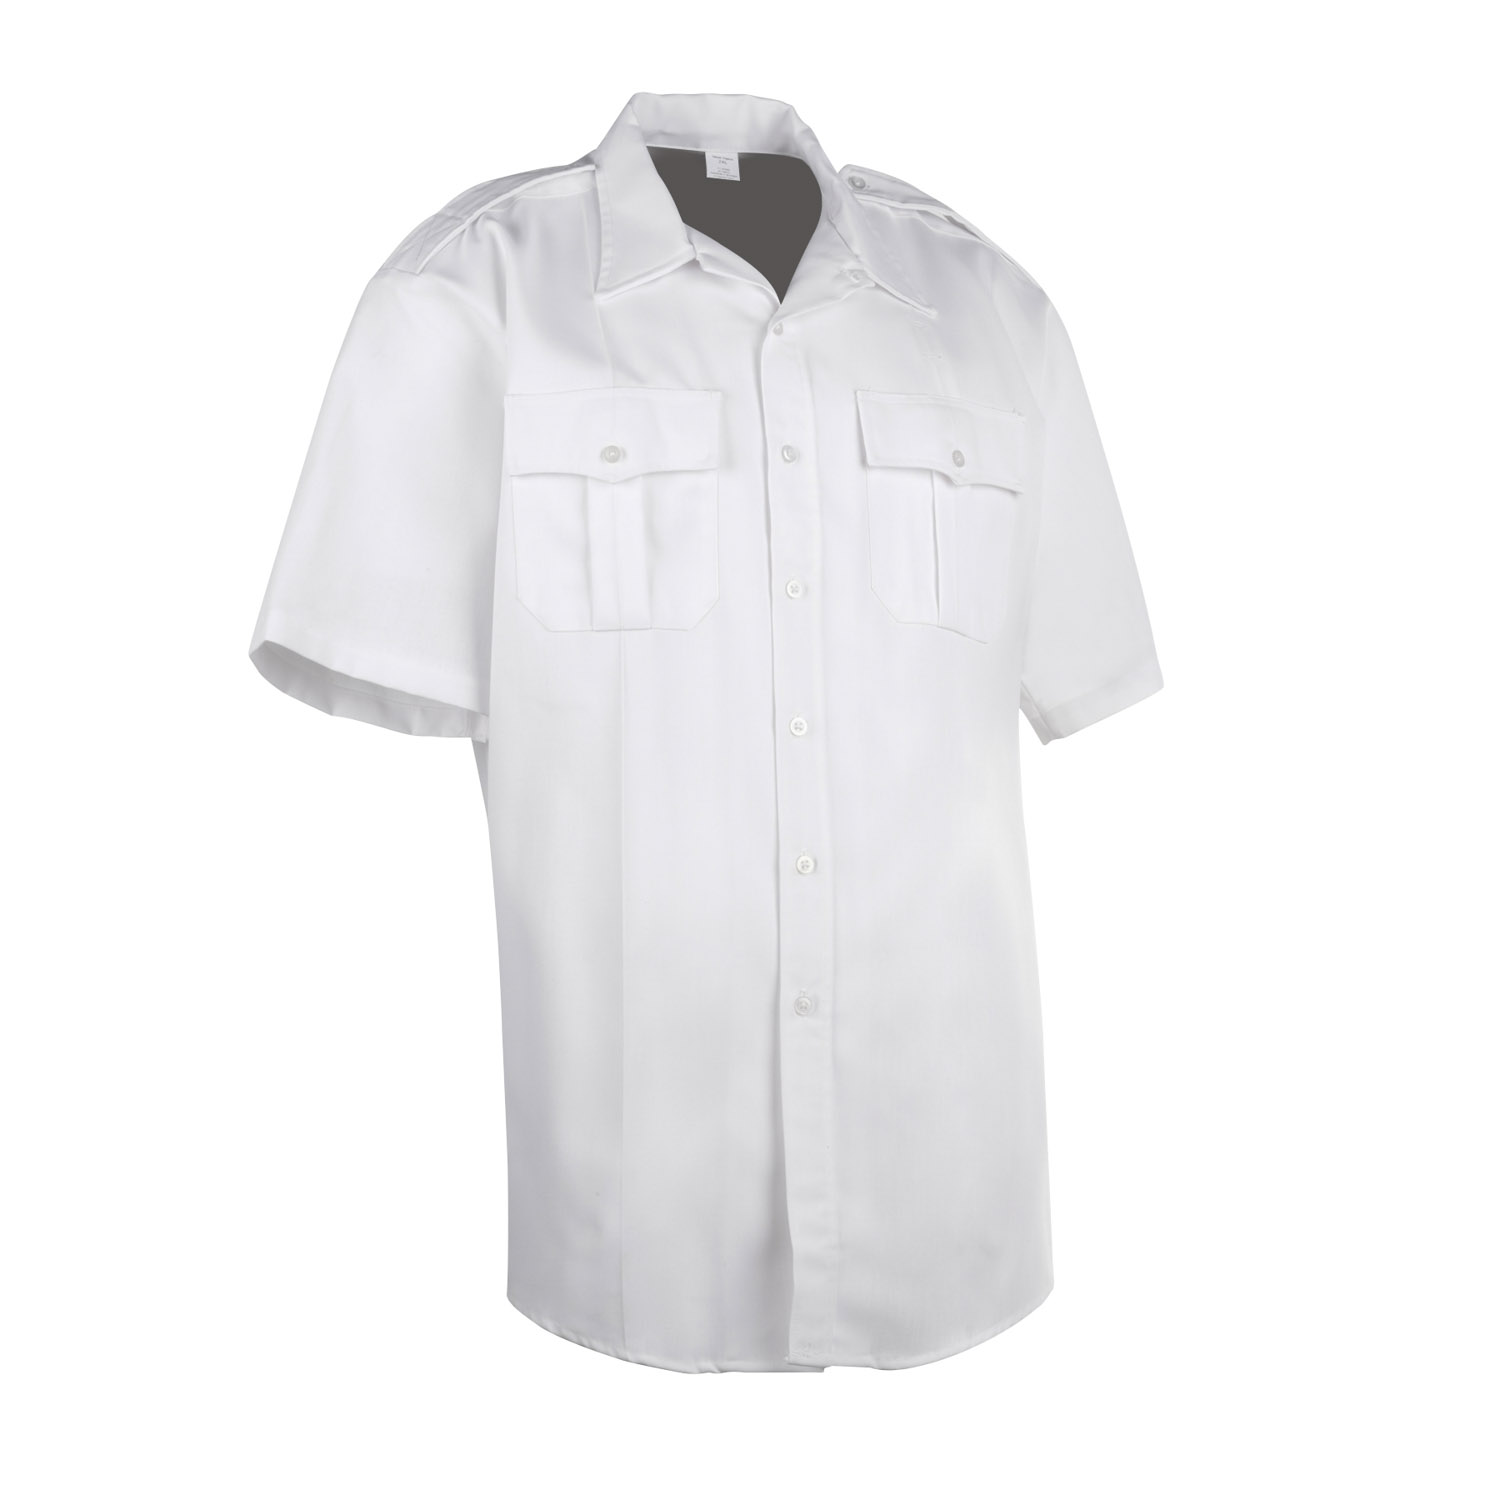 S/S WHITE TROPICAL DELUXE ALL WEATHER 65/35 DACRON POLYESTER